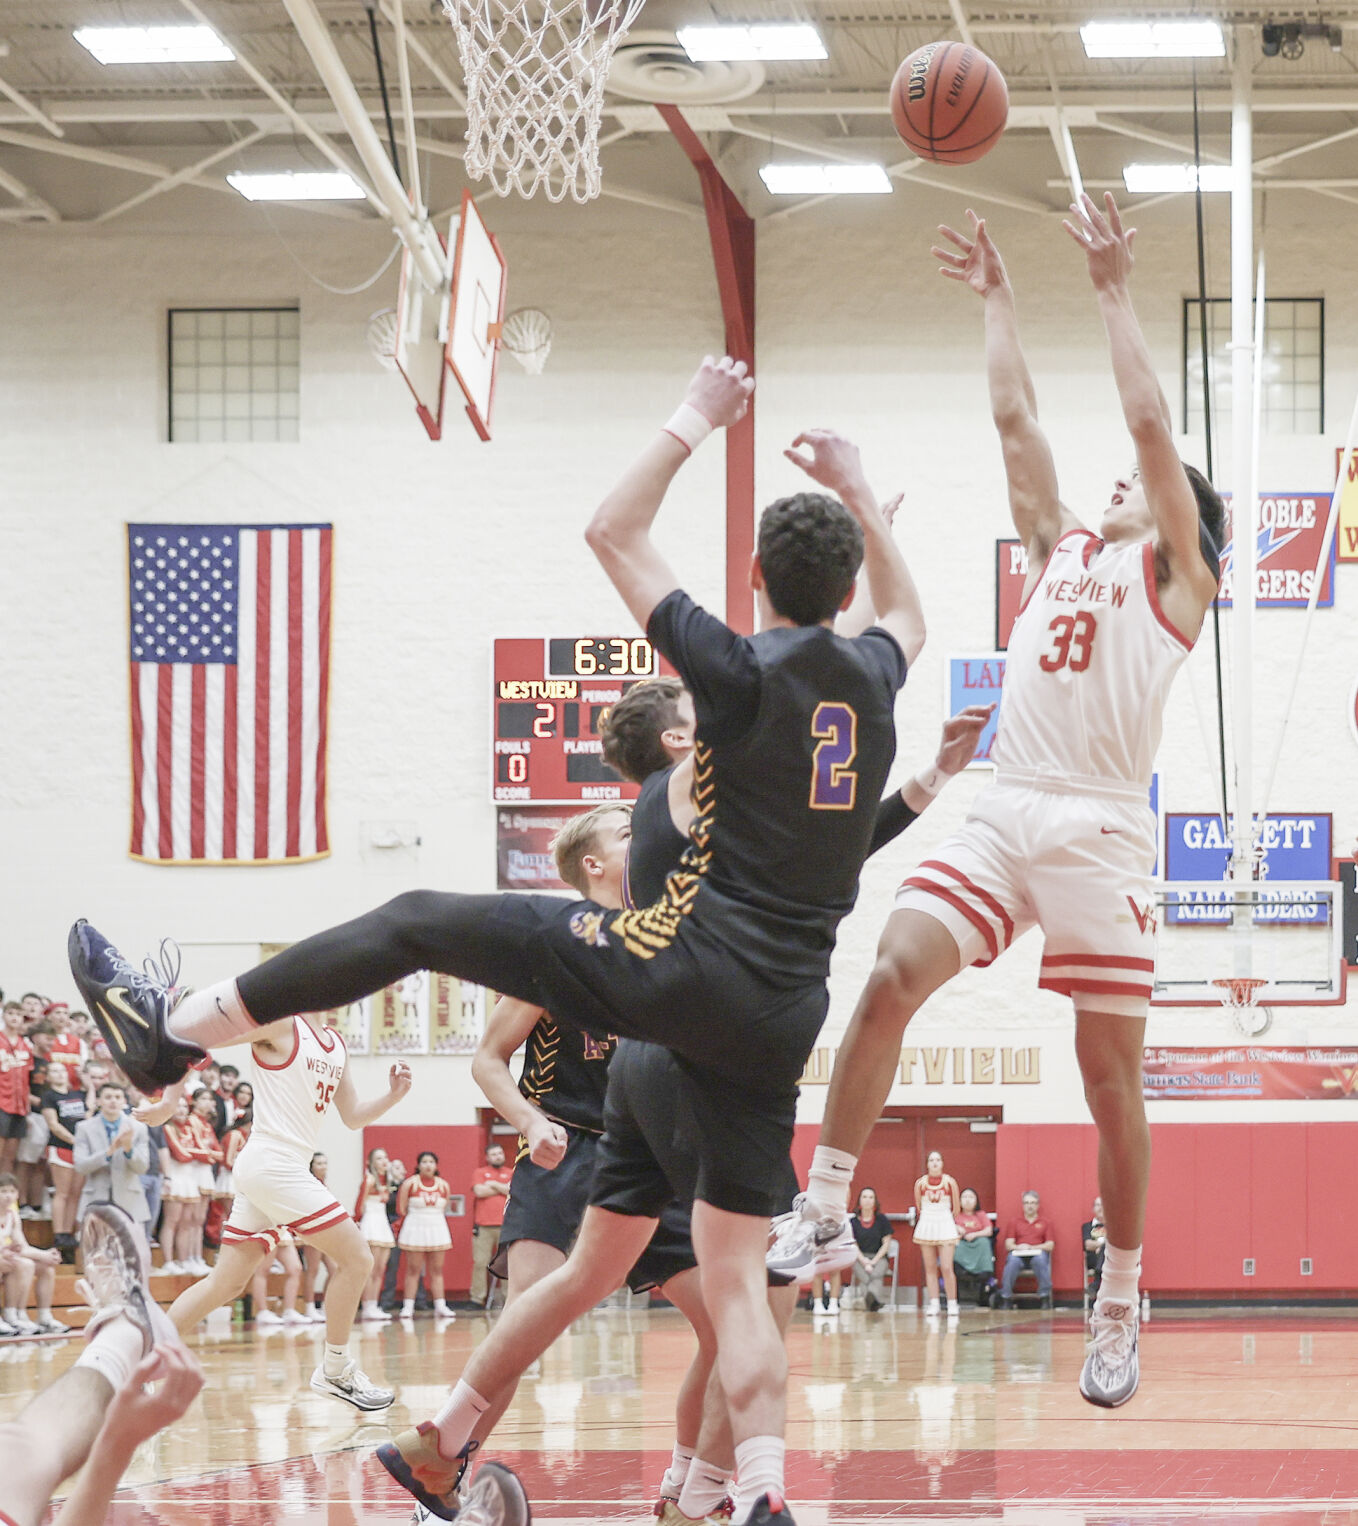 Westview secures thrilling victory over Angola in intense 45-42 showdown